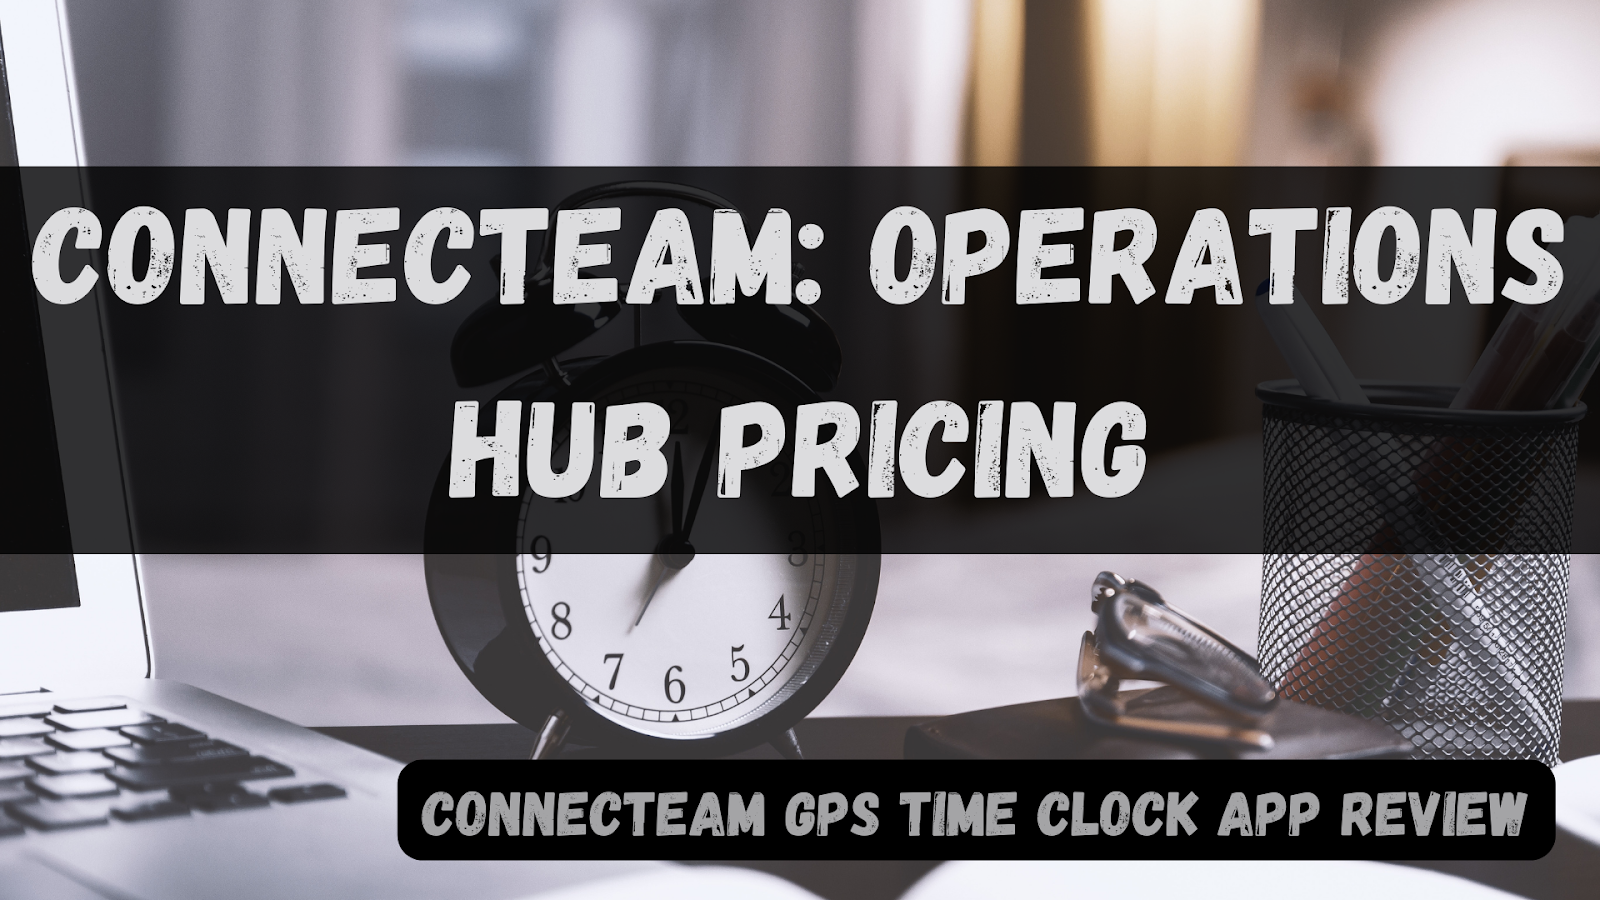 Connecteam: Operations Hub Pricing